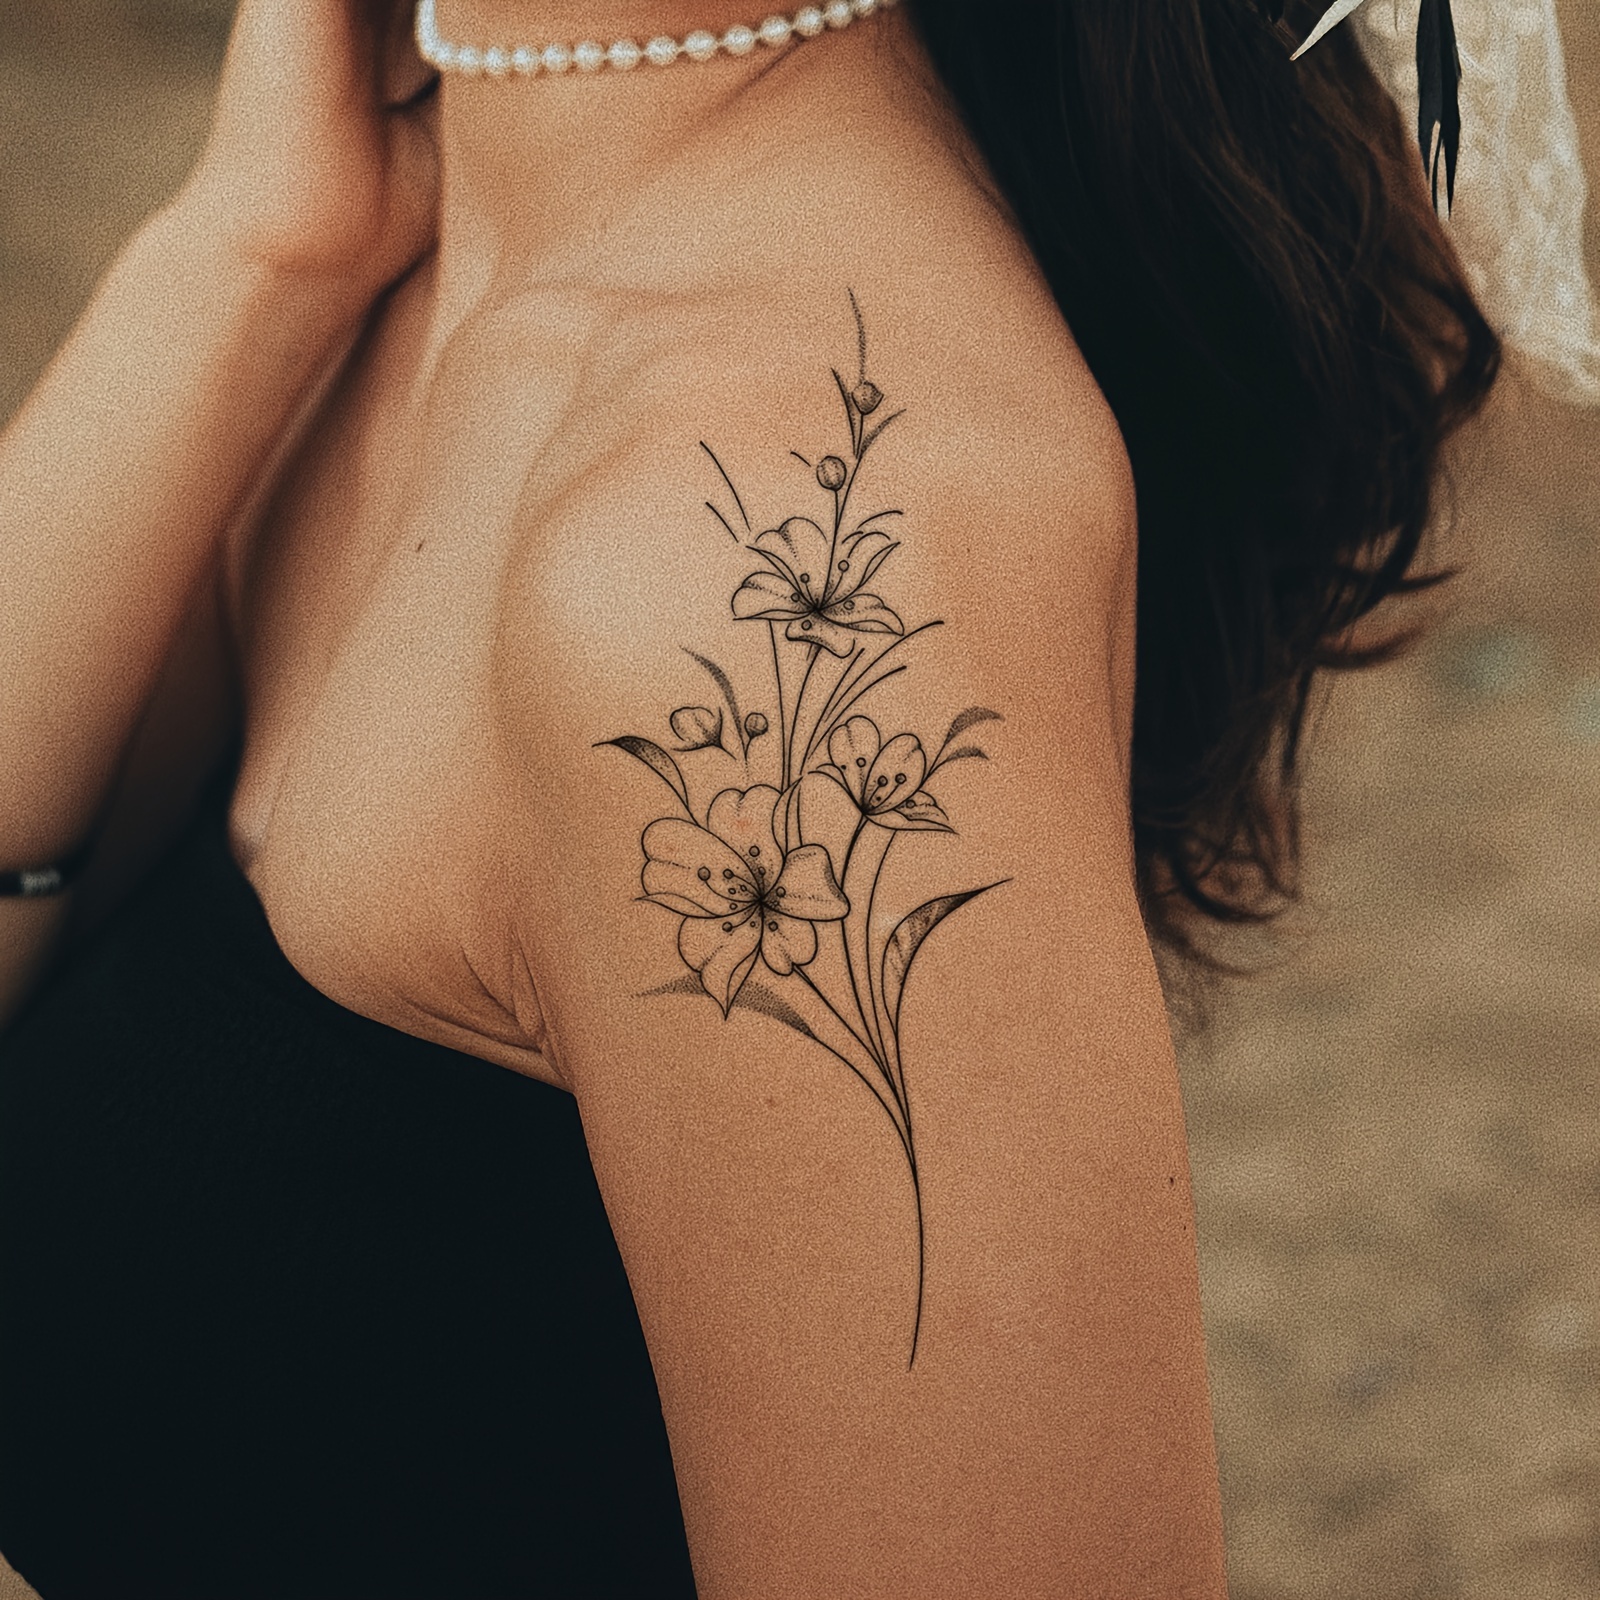 

1pc Temporary Tattoo Sticker, Minimalist Floral Design, Fashionable Ins Style, Long-lasting 1-3 Days, Easy Application Body Art